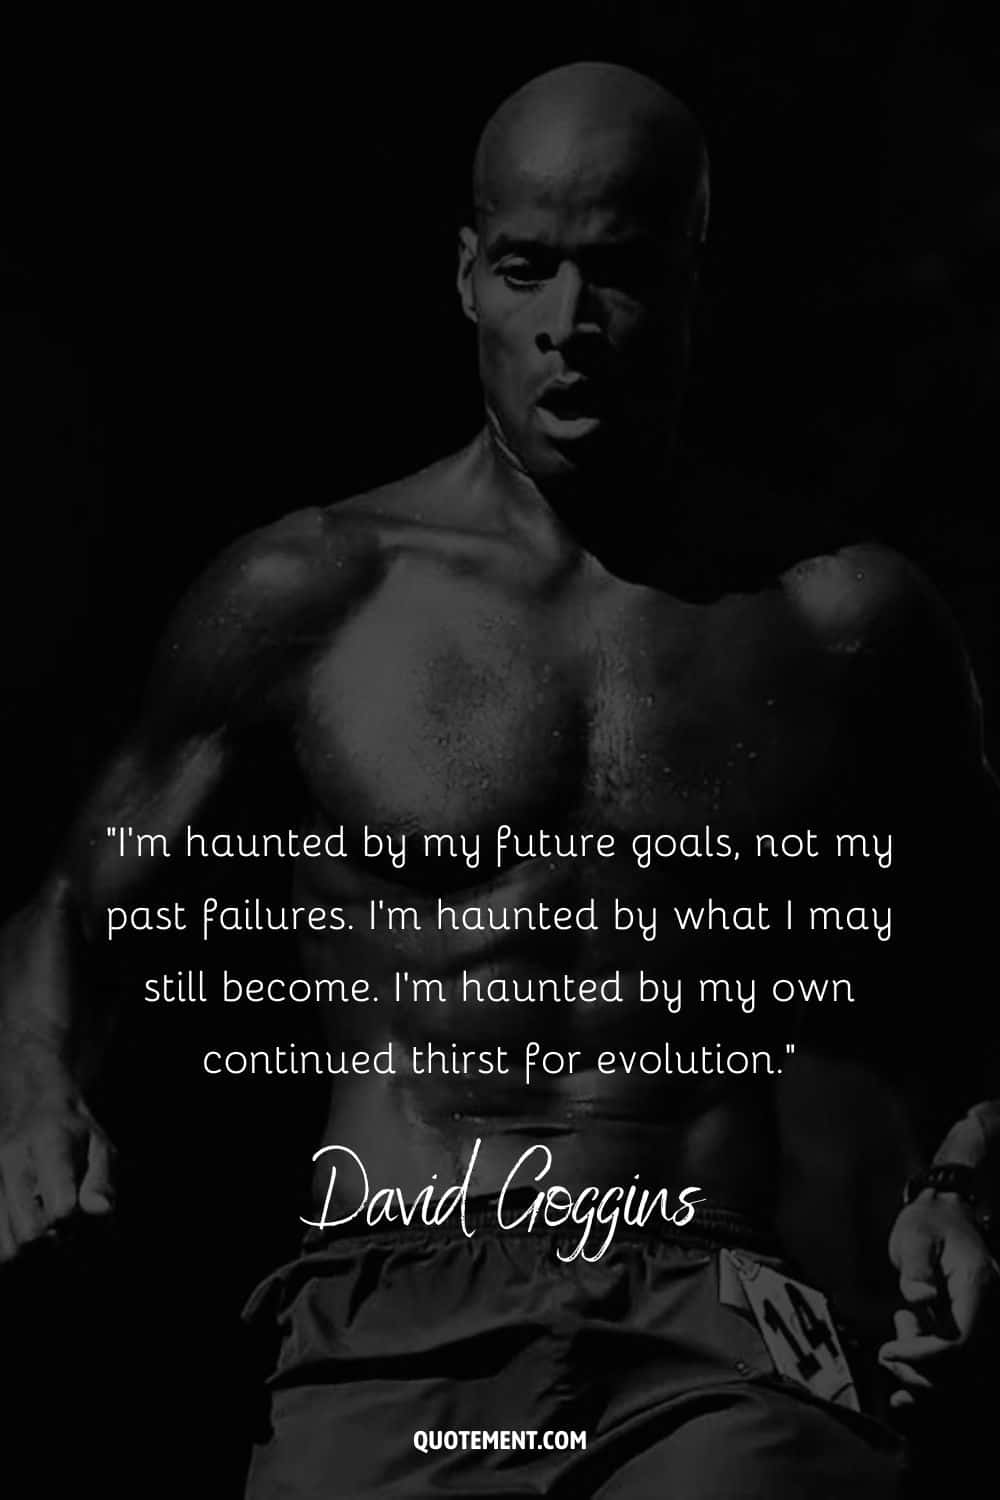 Deep quote on being haunted by various things by David Goggins and his photo in the background